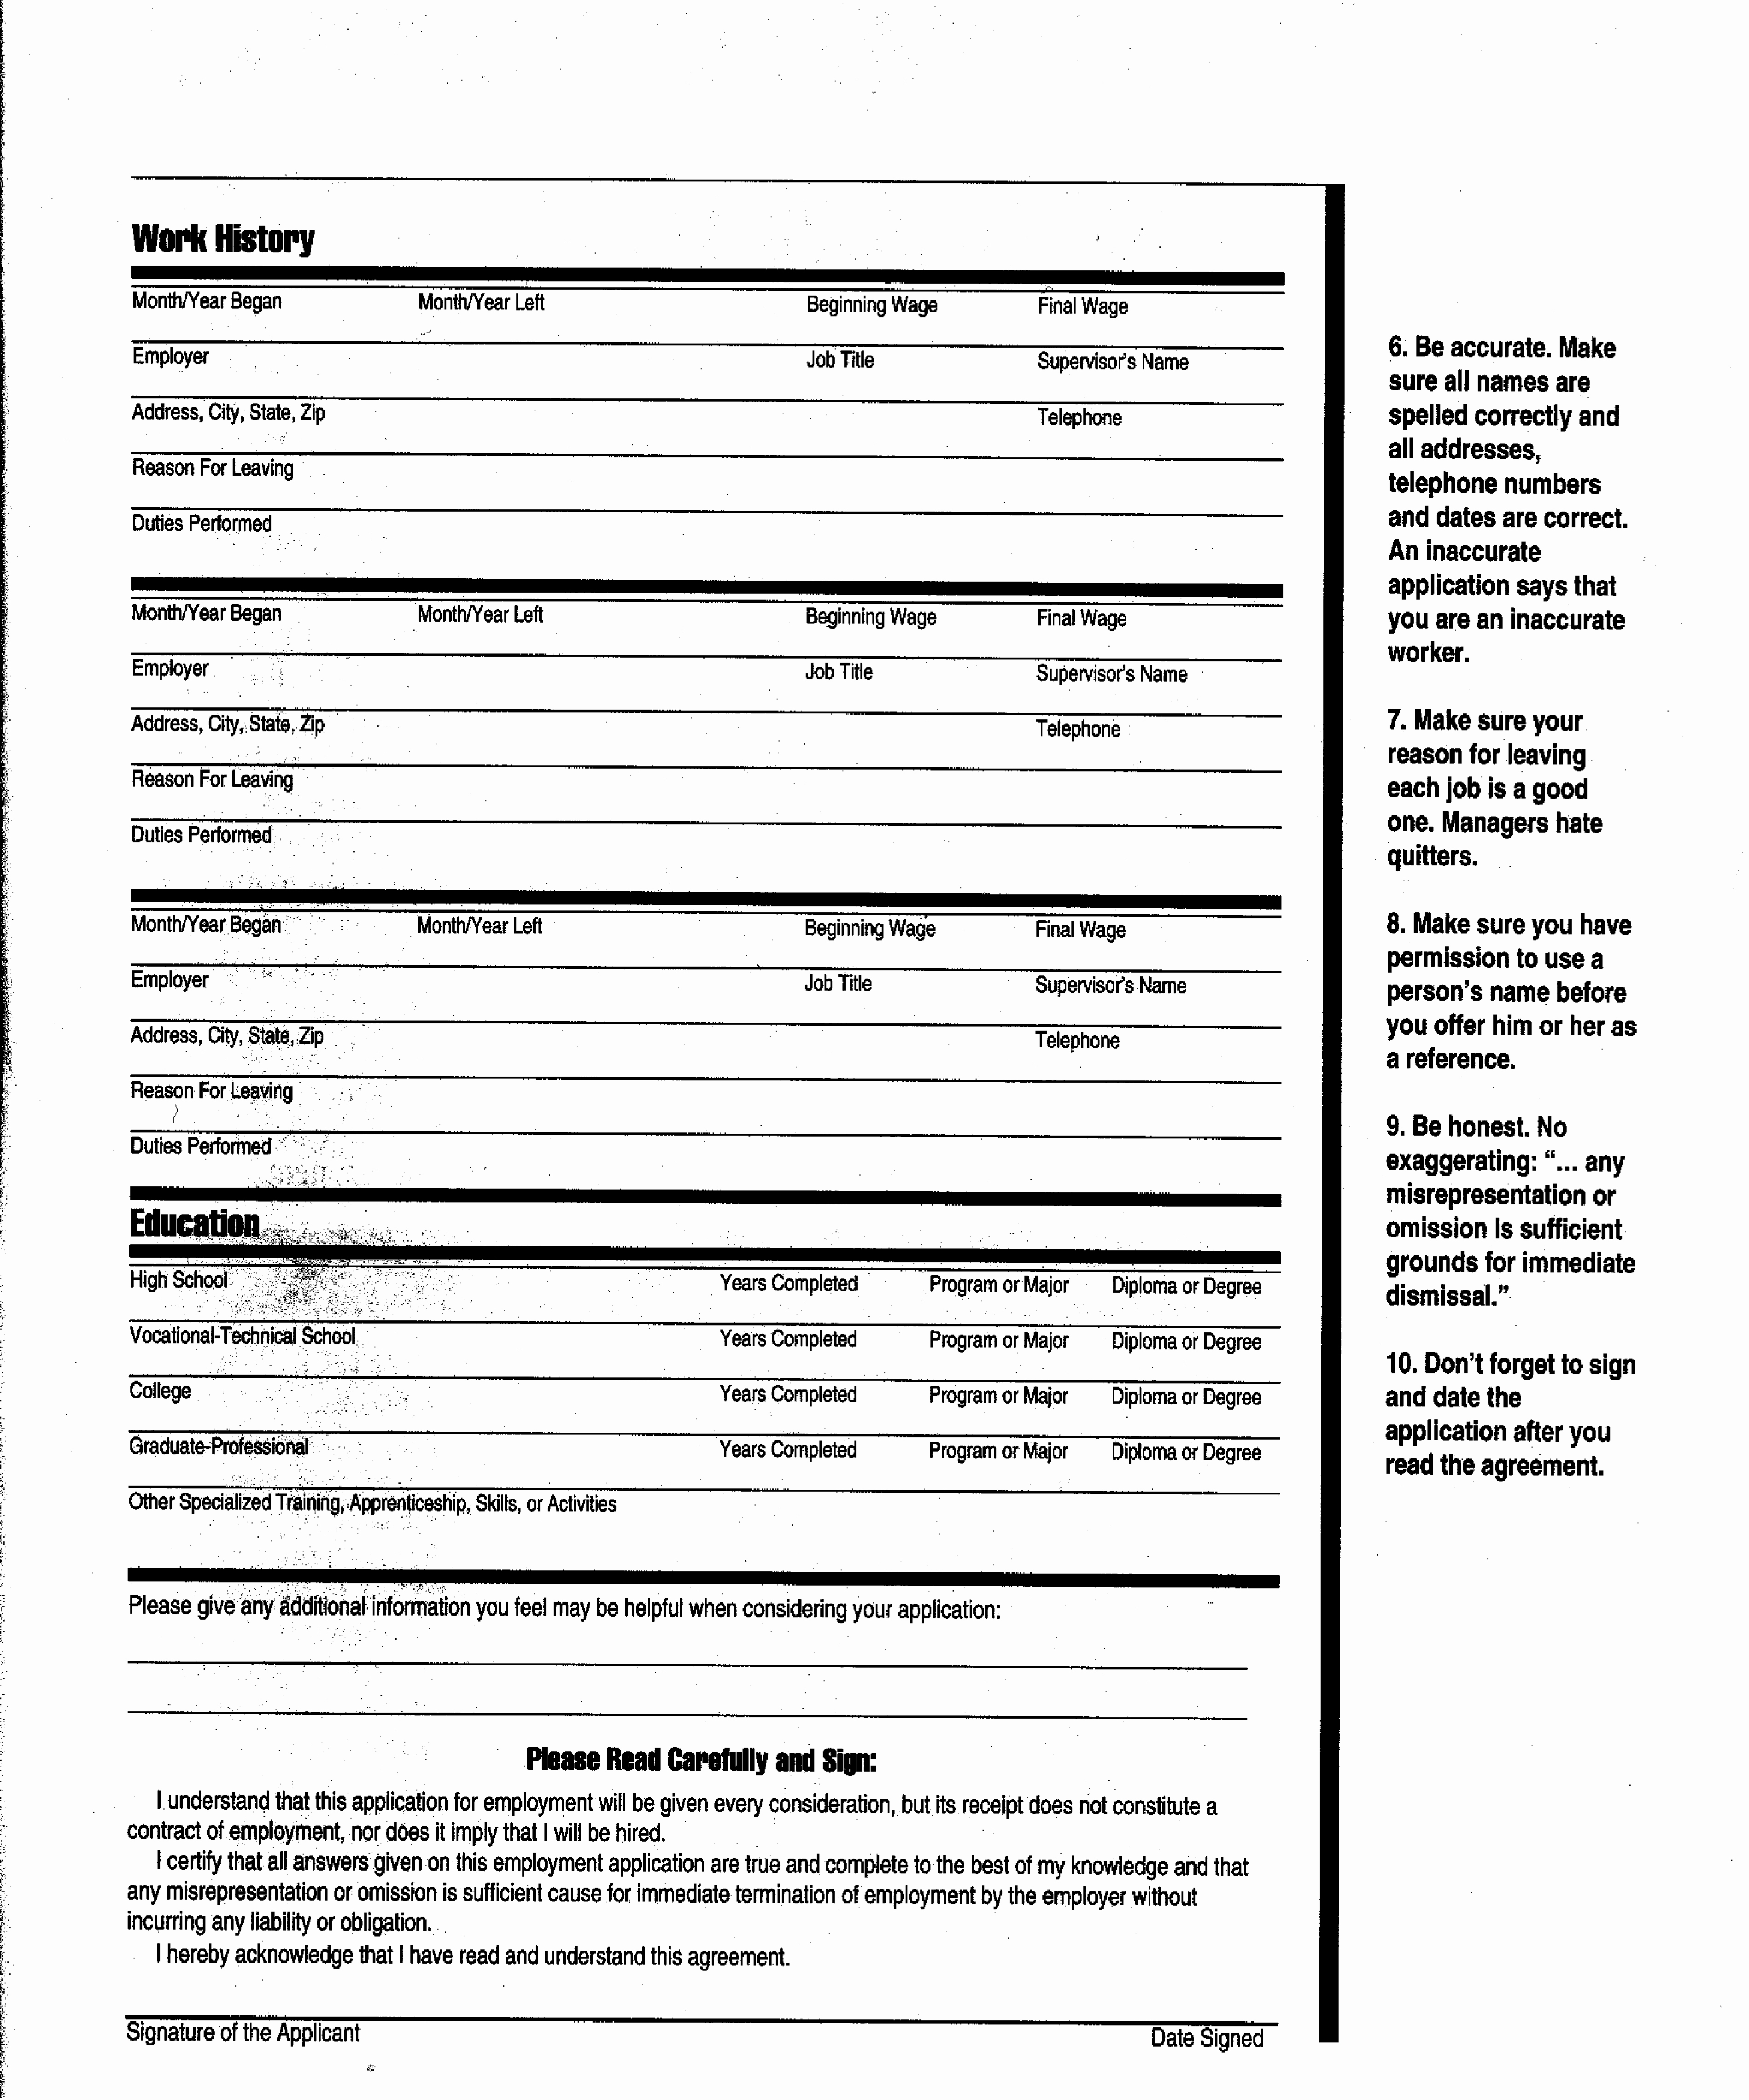 Resume forms to Fill Out Awesome Best S Of Fill In Free Will forms Blank forms to